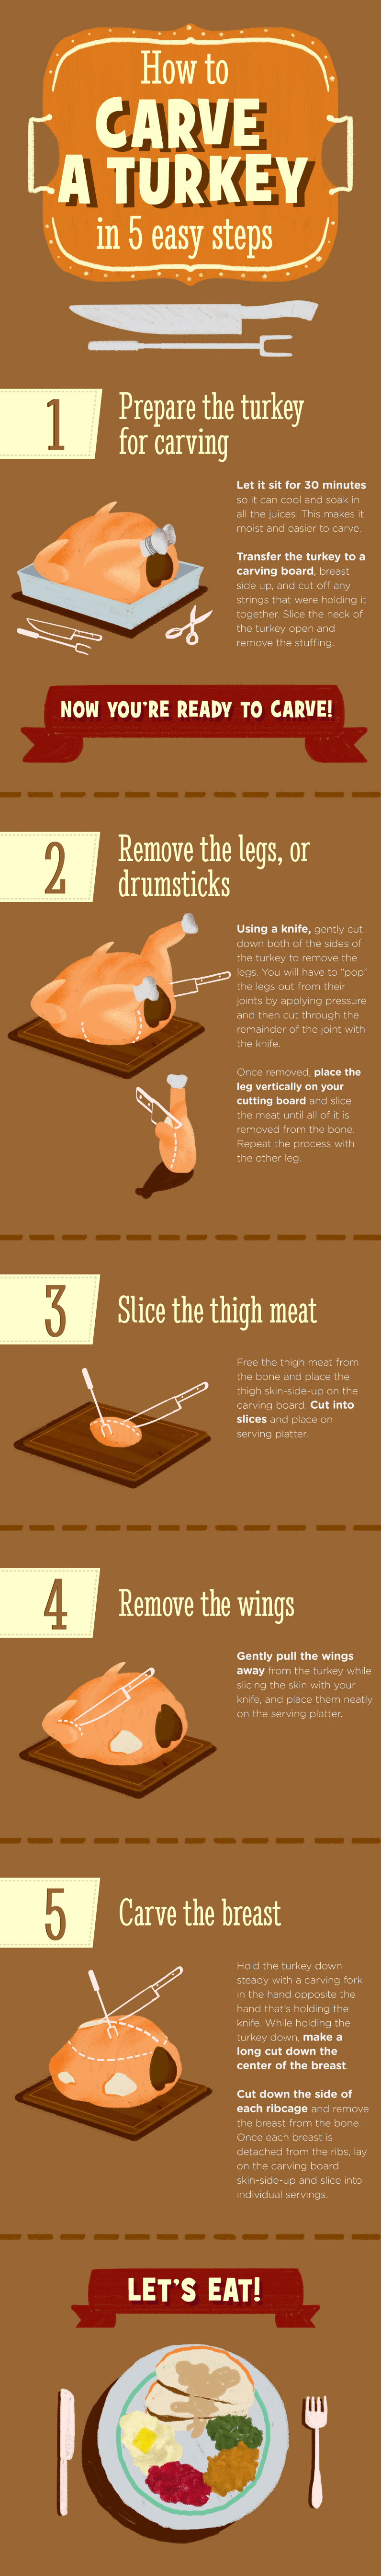 Turkey Carving In 5 Easy Steps